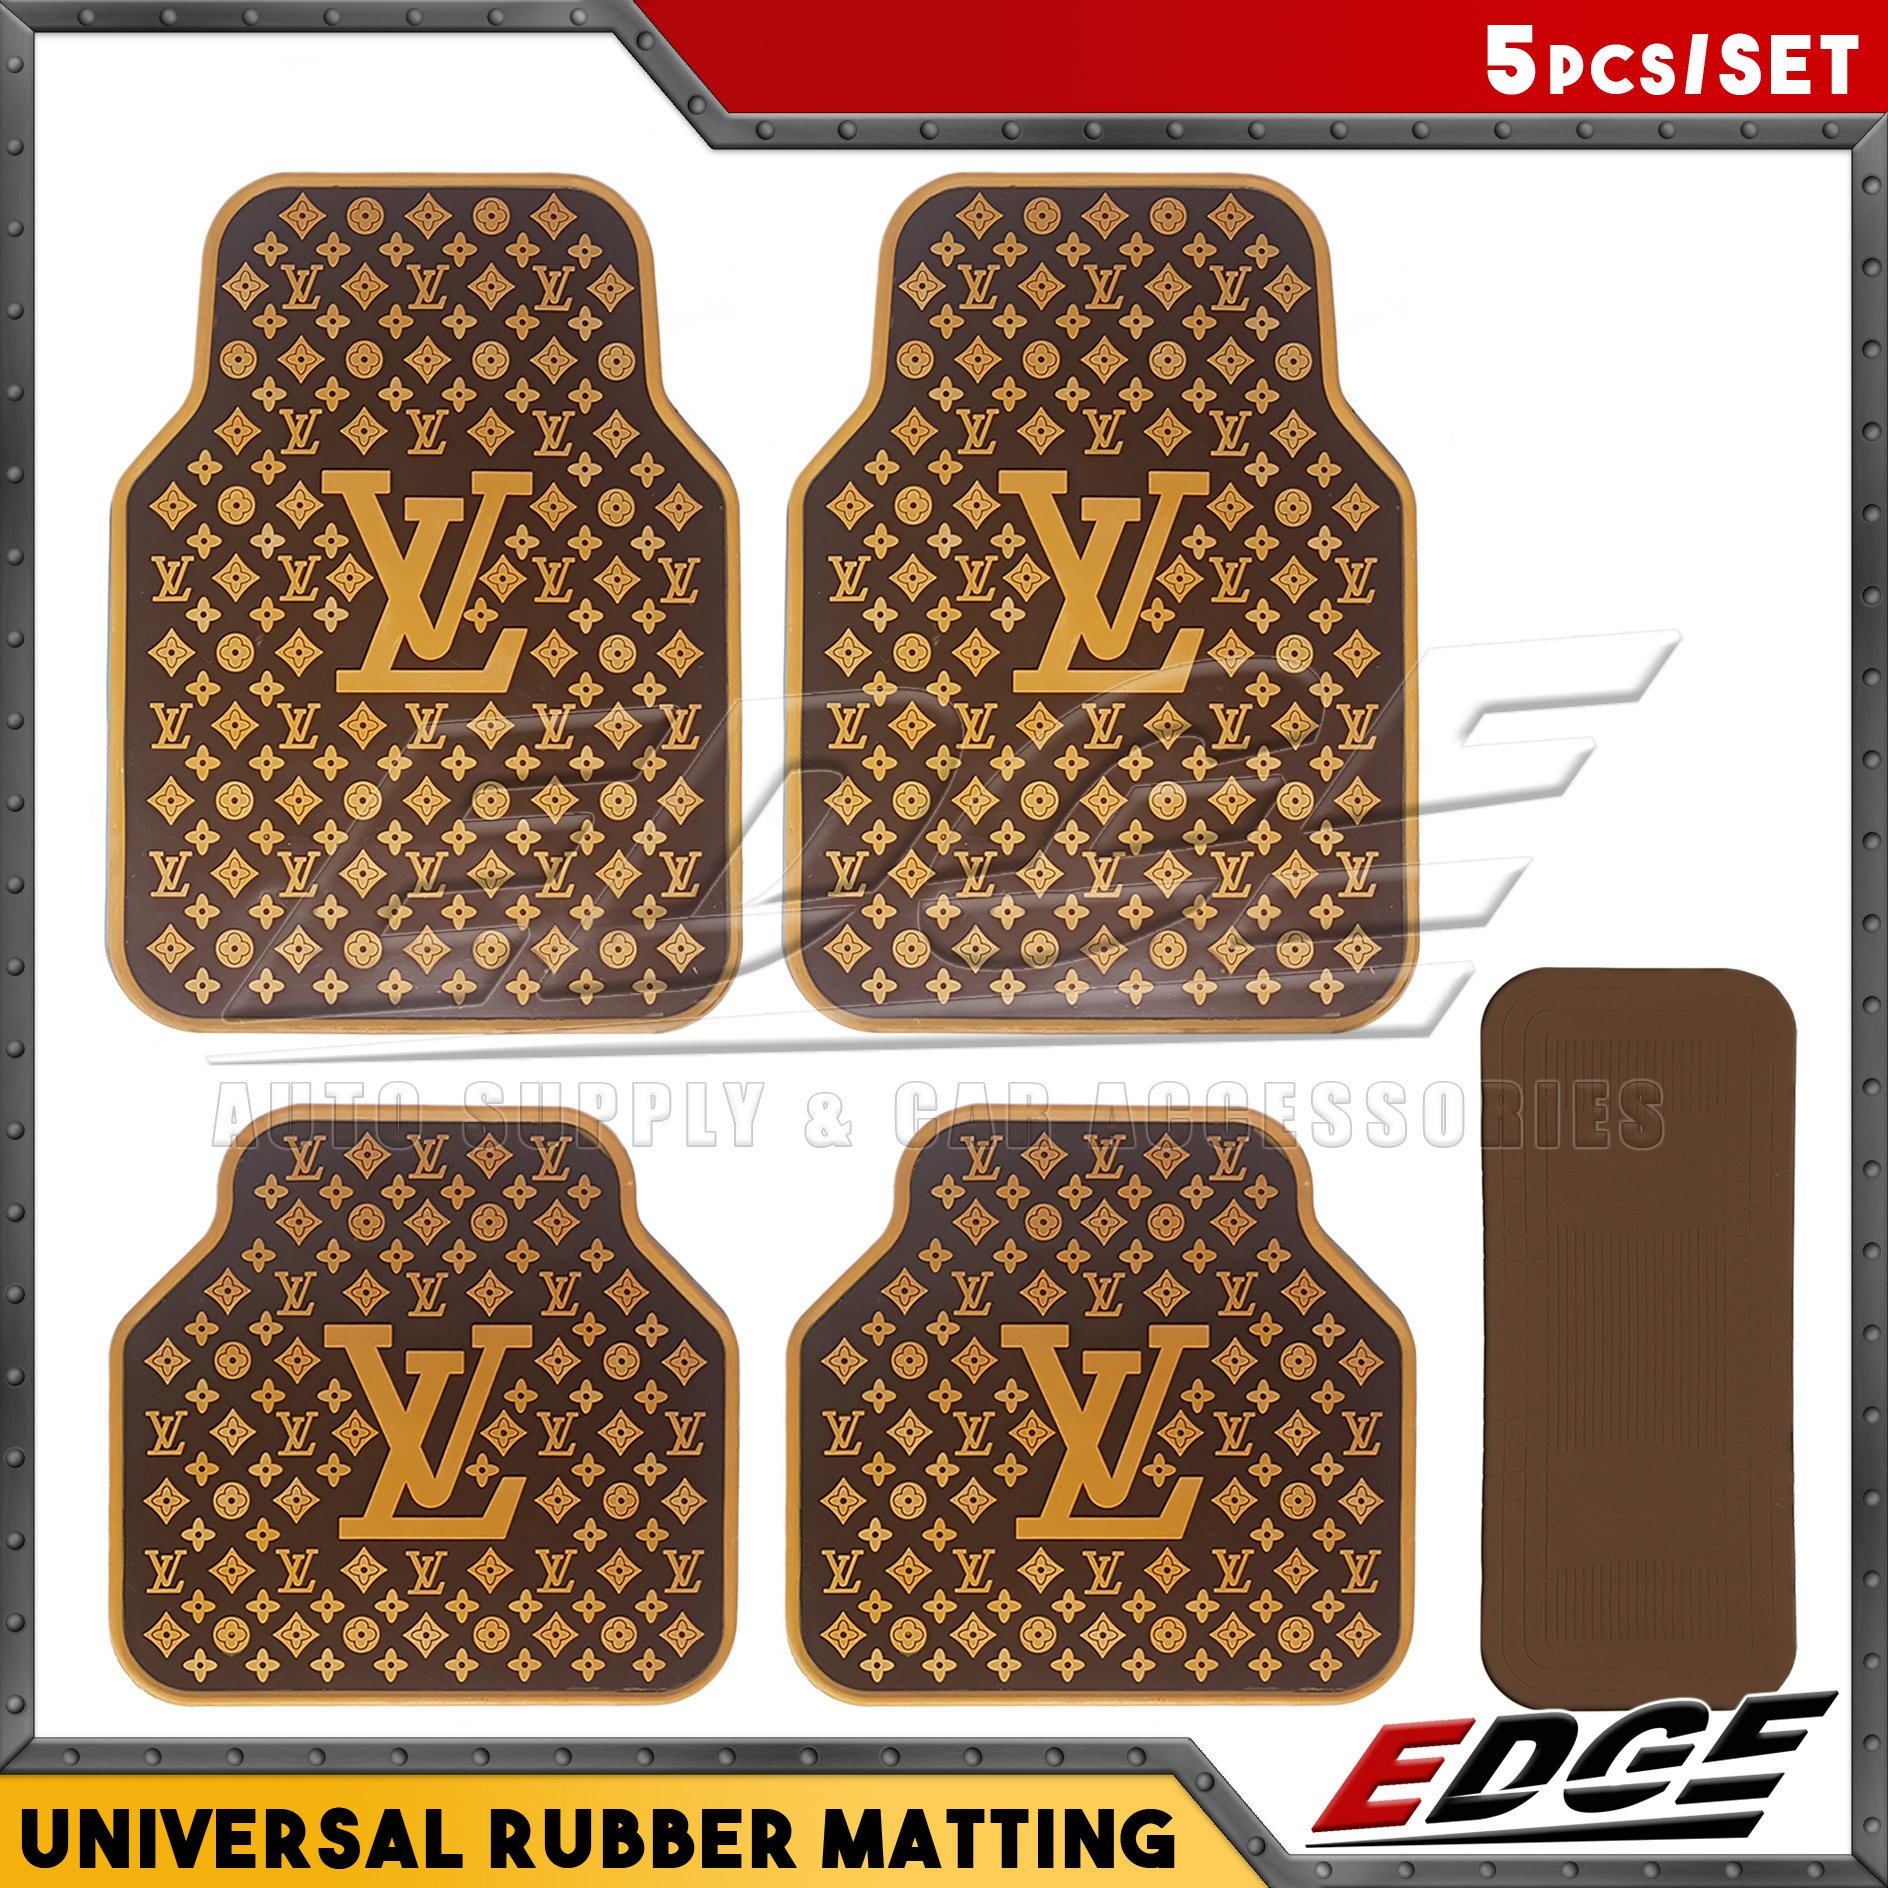 Louis Vuitton Car Floor Mat Available in Abossey Okai - Vehicle Parts &  Accessories, Abossey Car Parts